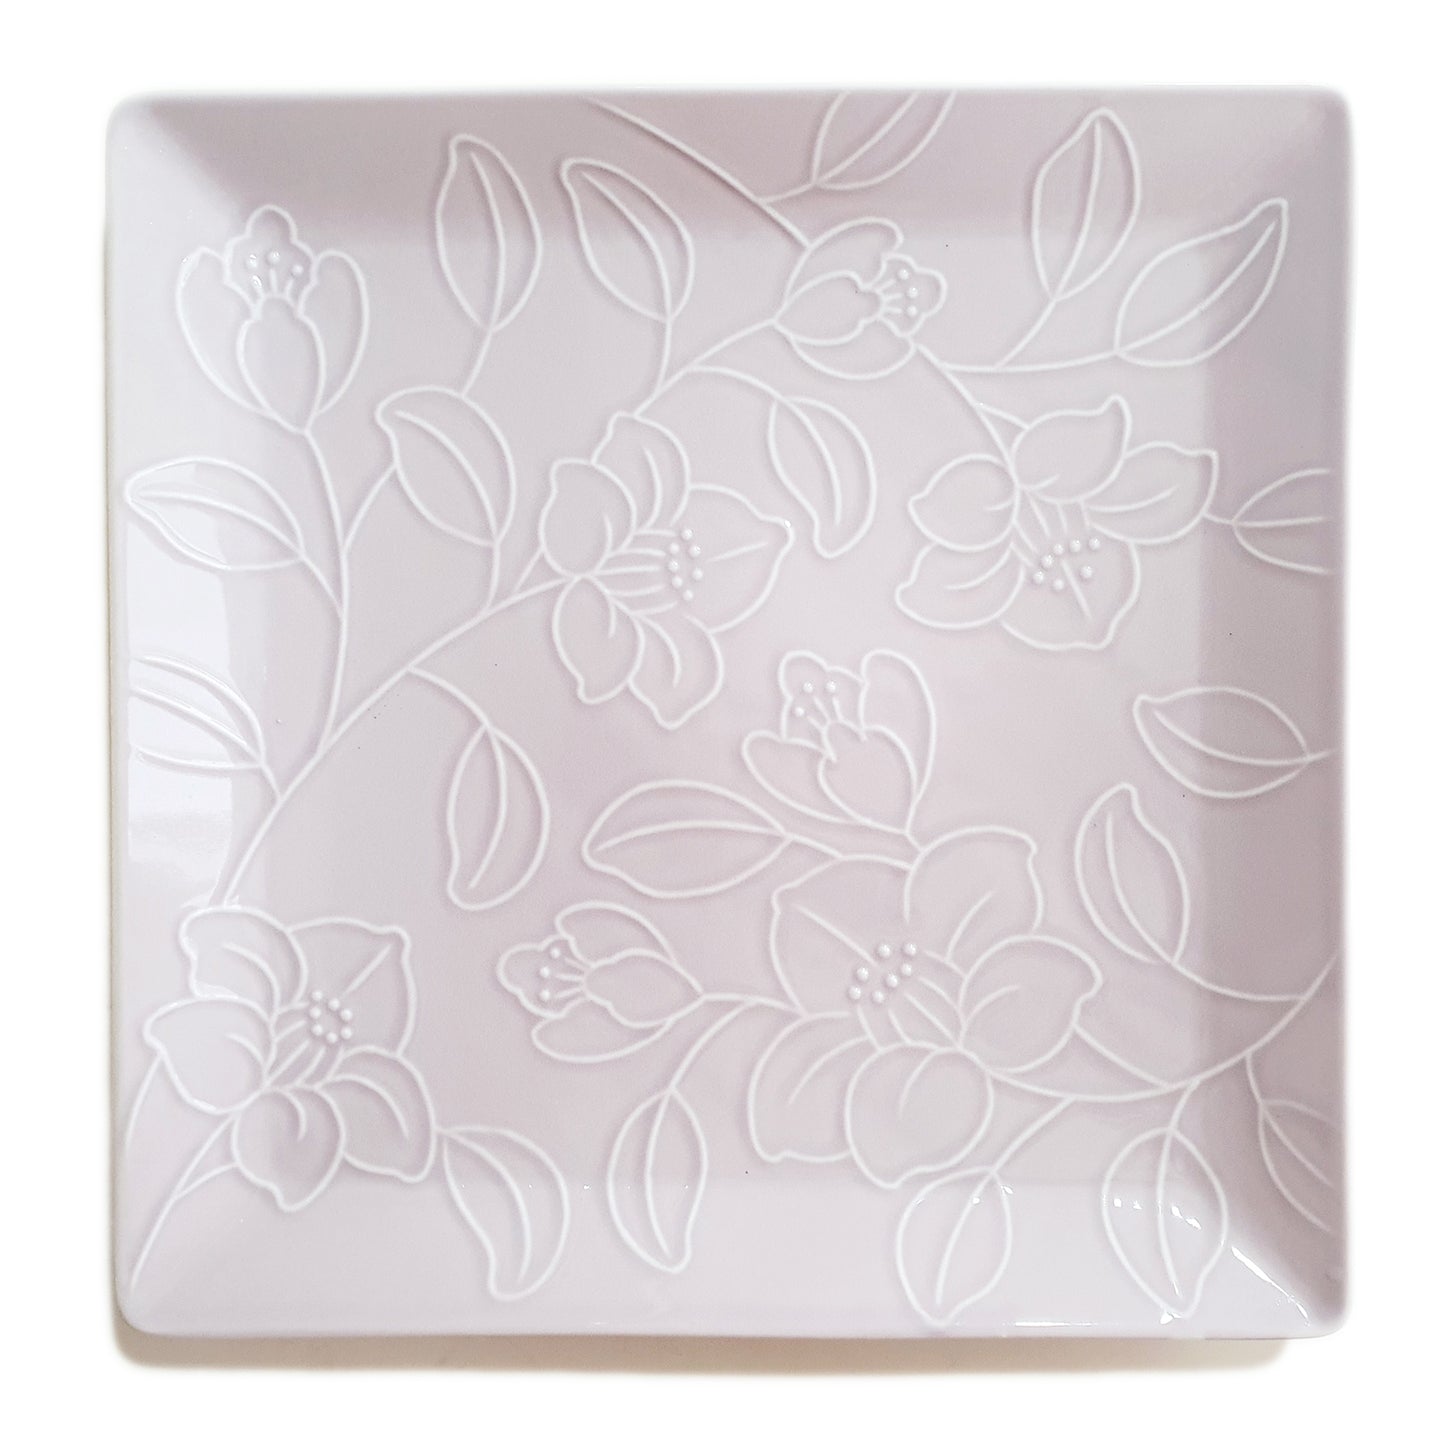 Refreshing Square Dinner/Sharing Plate 280mm (Pink Color)𝟭 𝗣𝗹𝘂𝘀 𝟭